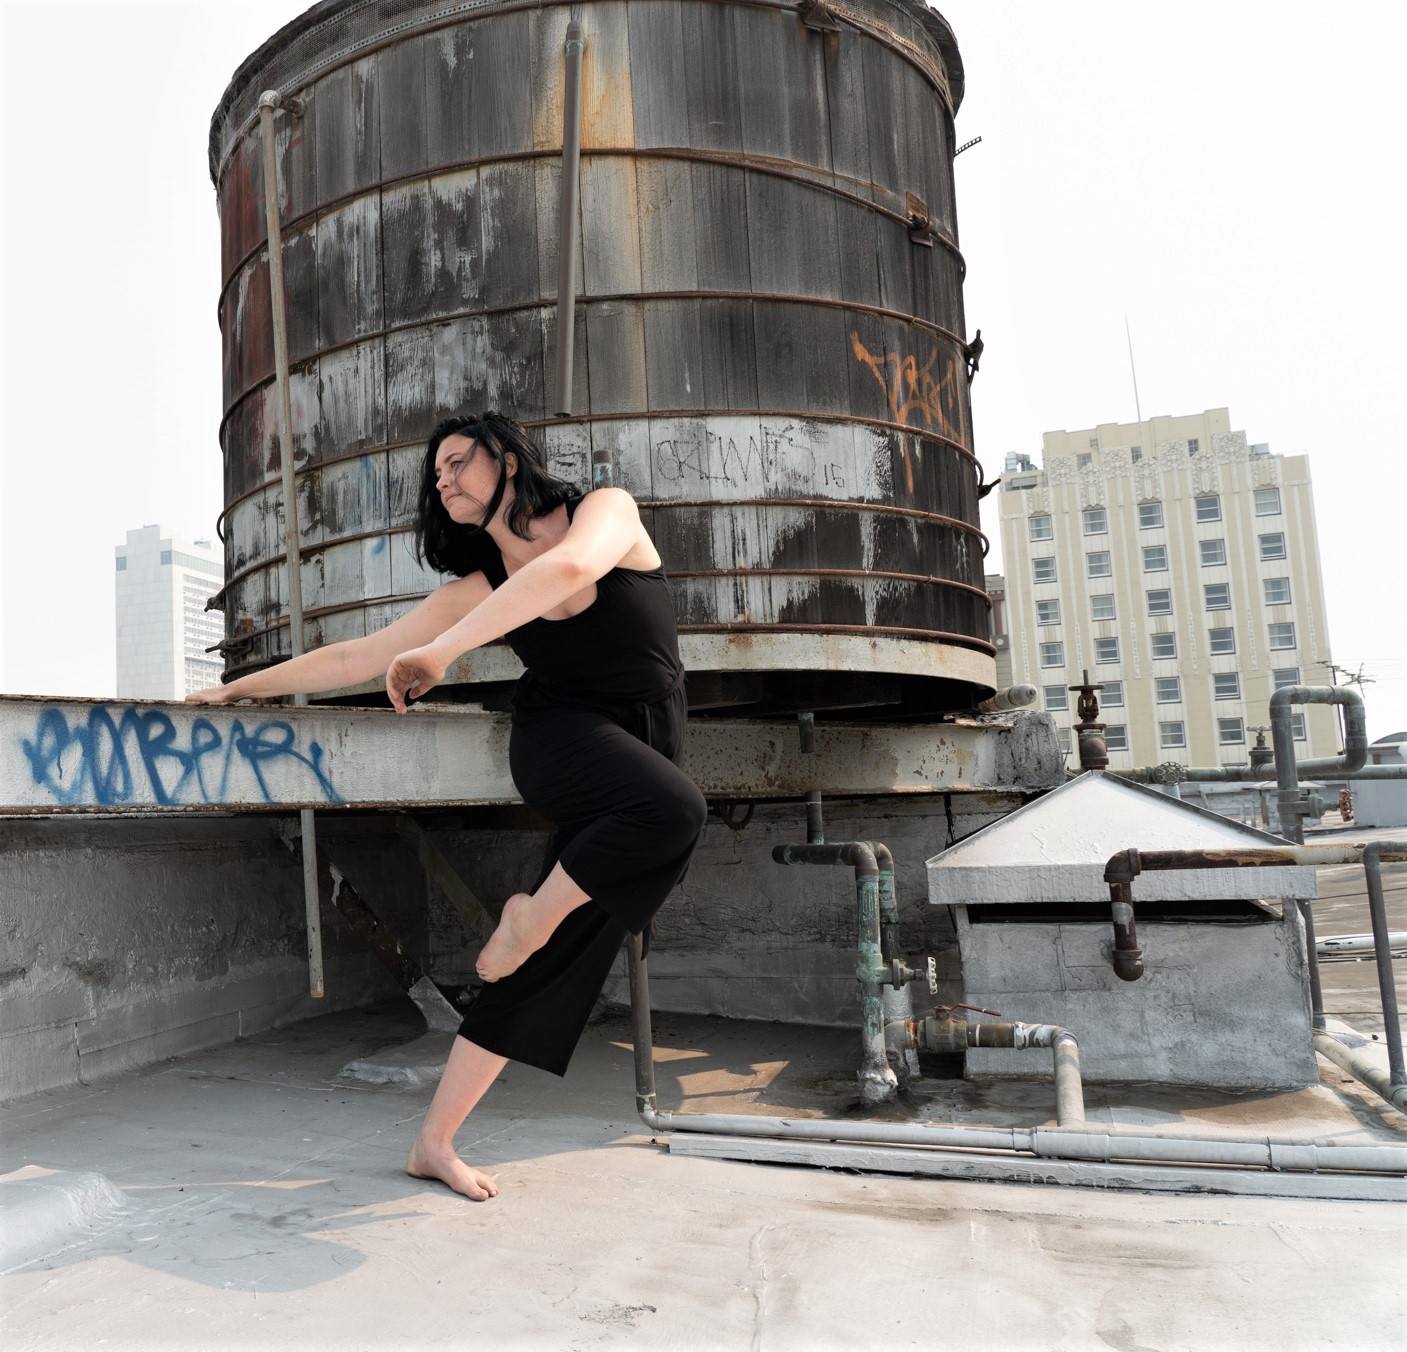 Jenna Valez dancing in front of a water tower